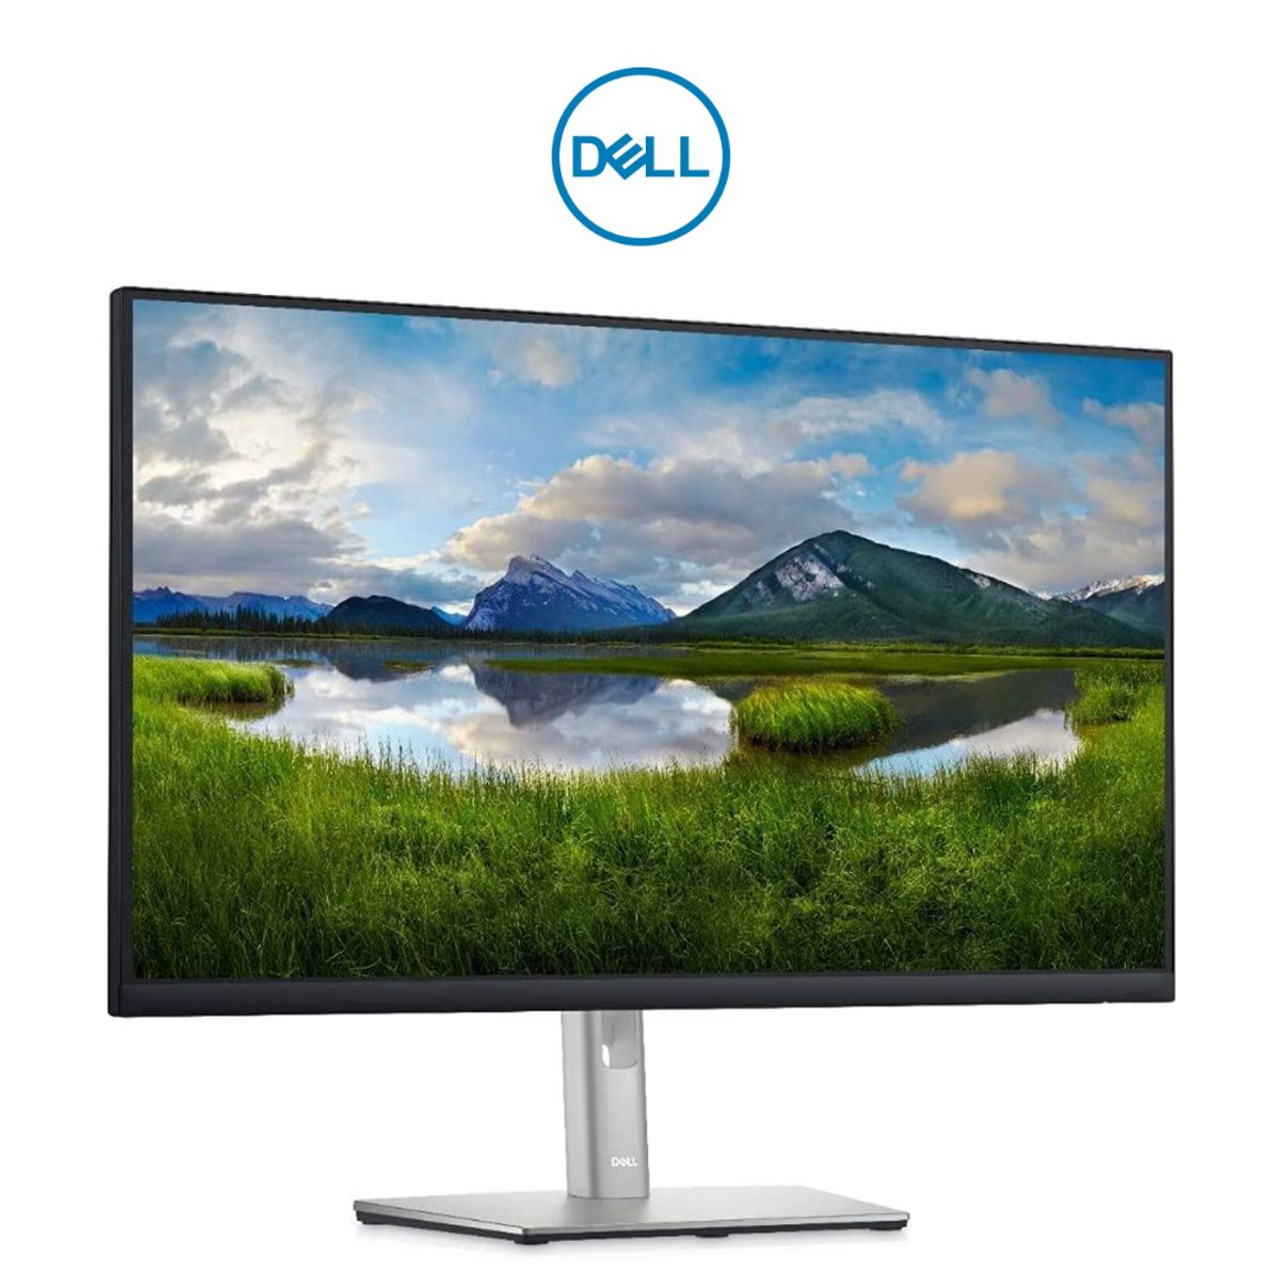 Dell 27-inch FHD Computer Monitor product image